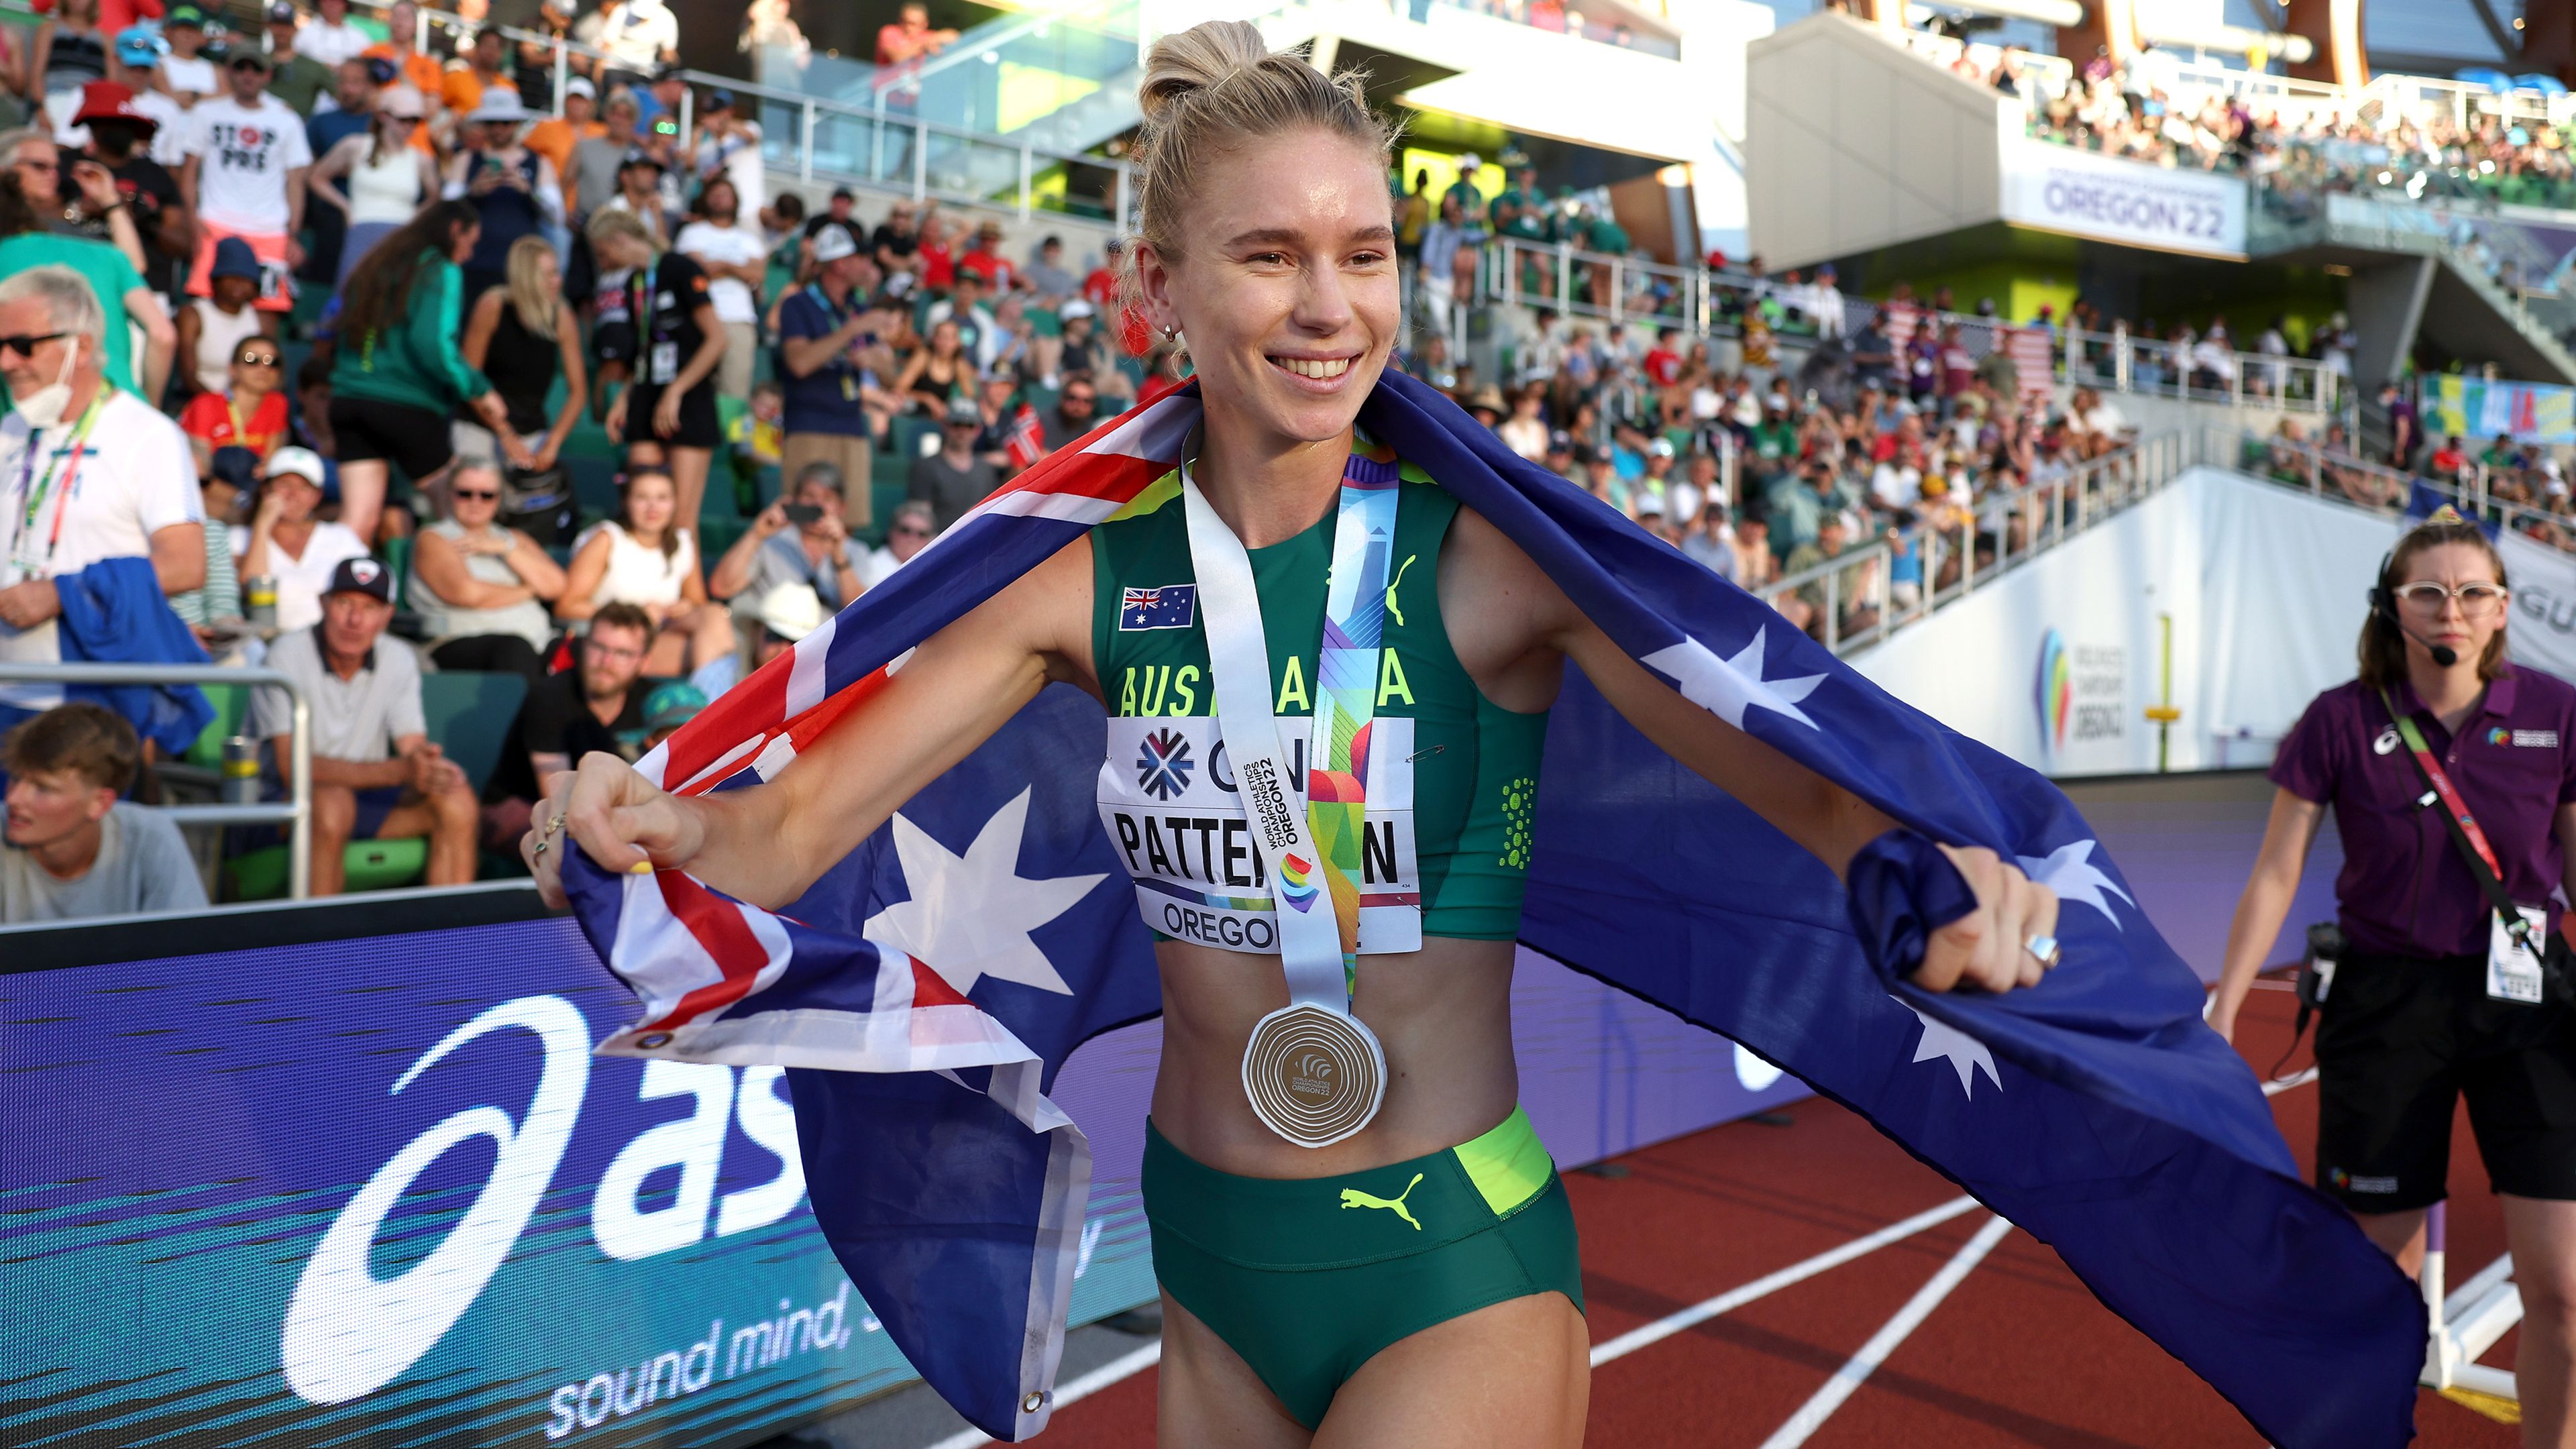 'Unbelievable' jump wins Australian Eleanor Patterson high jump gold medal at World Championships 